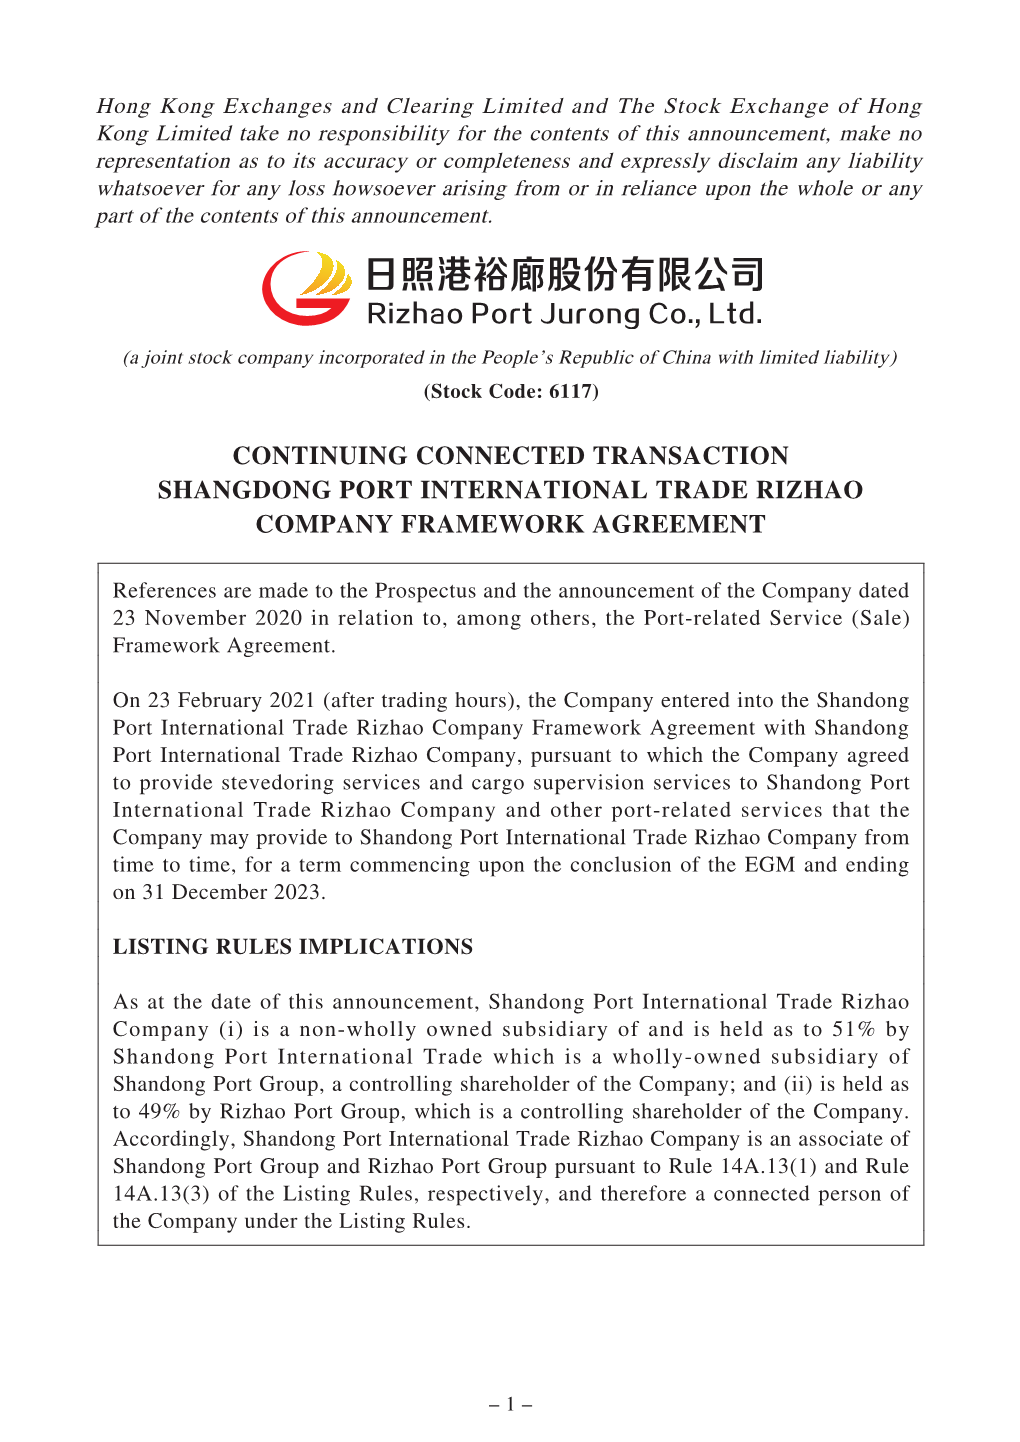 Continuing Connected Transaction Shangdong Port International Trade Rizhao Company Framework Agreement